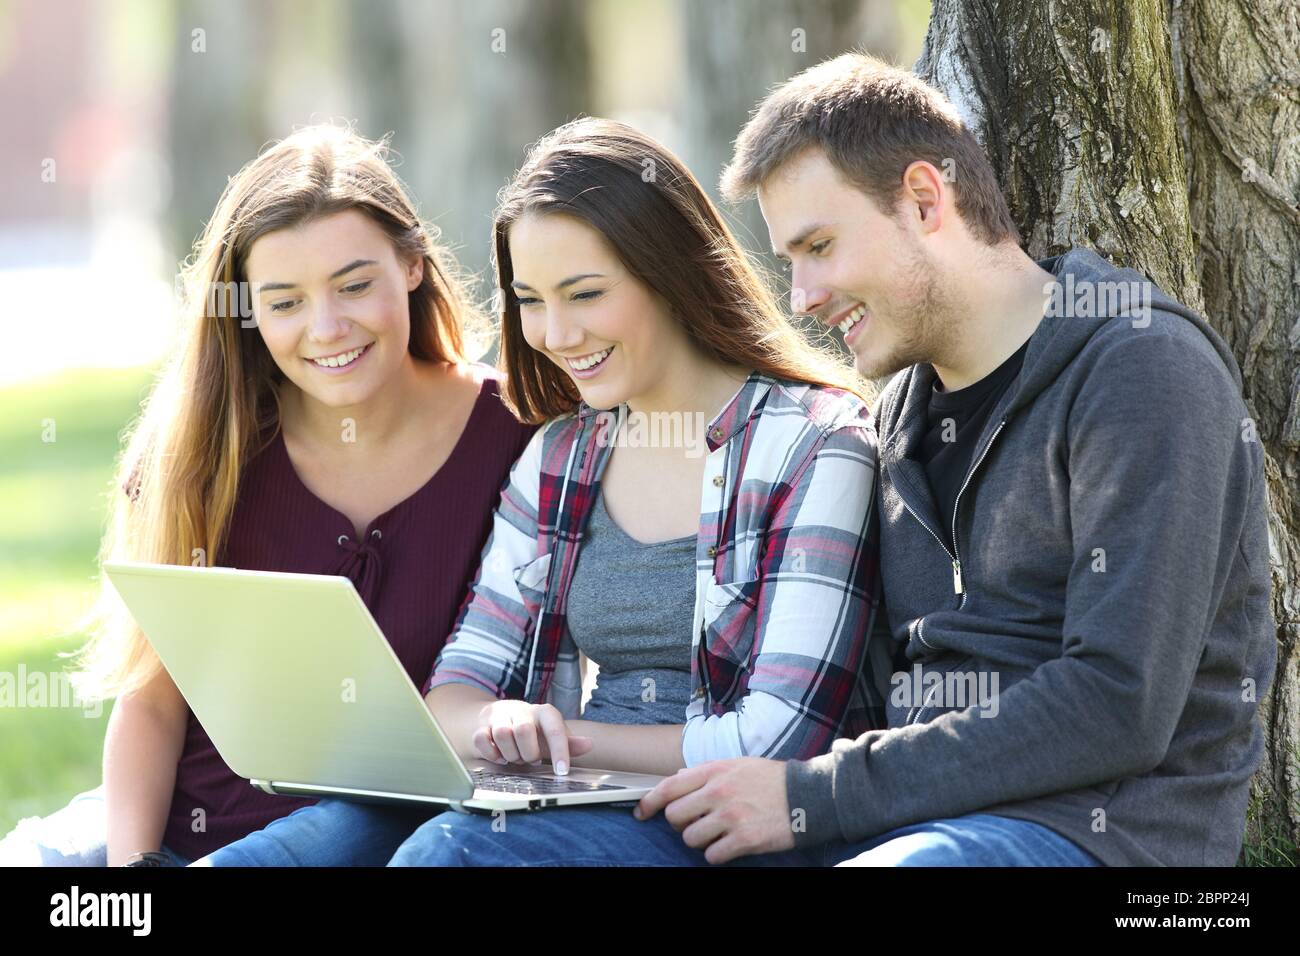 Three happy teenagers searching media content together on line with a laptop sitting on the grass in a park Stock Photo